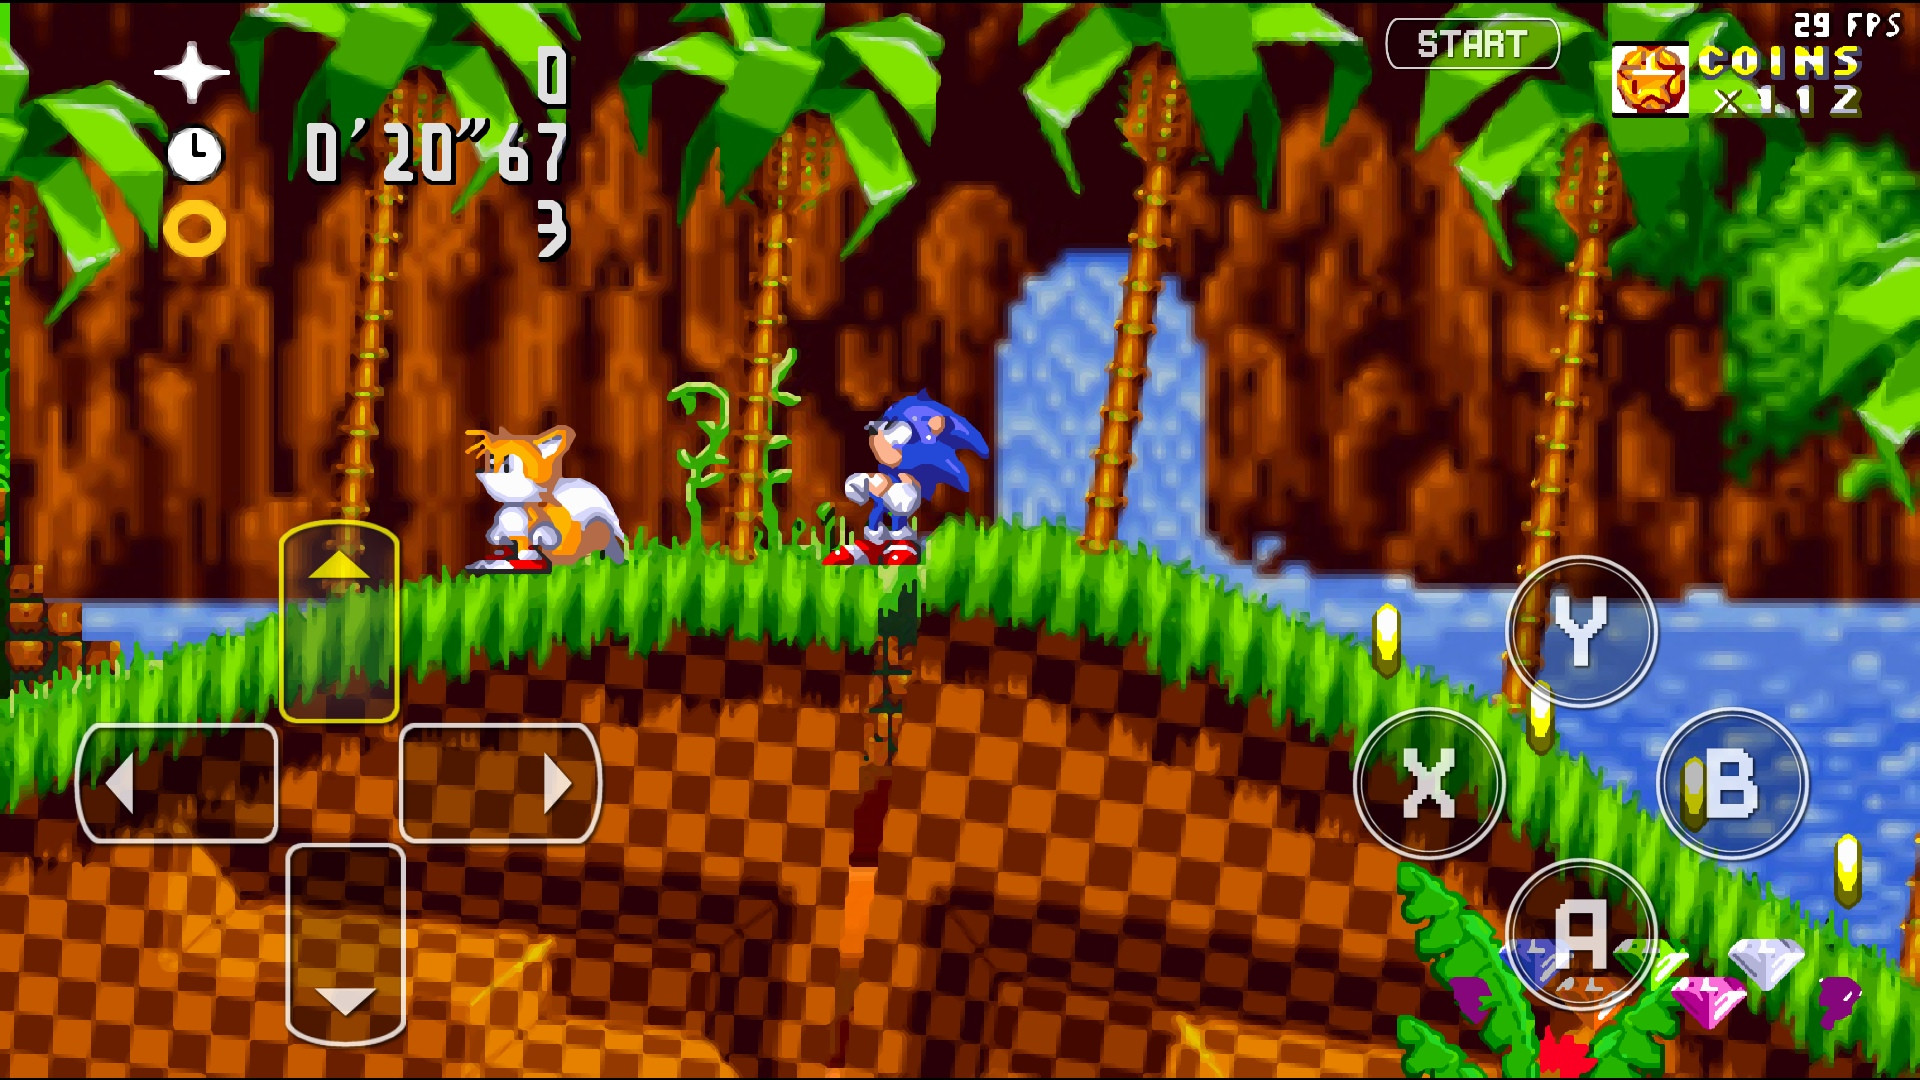 Green Hill Zone (Modern, Genesis-Style) Background [Sonic 3 A.I.R.] [Mods]